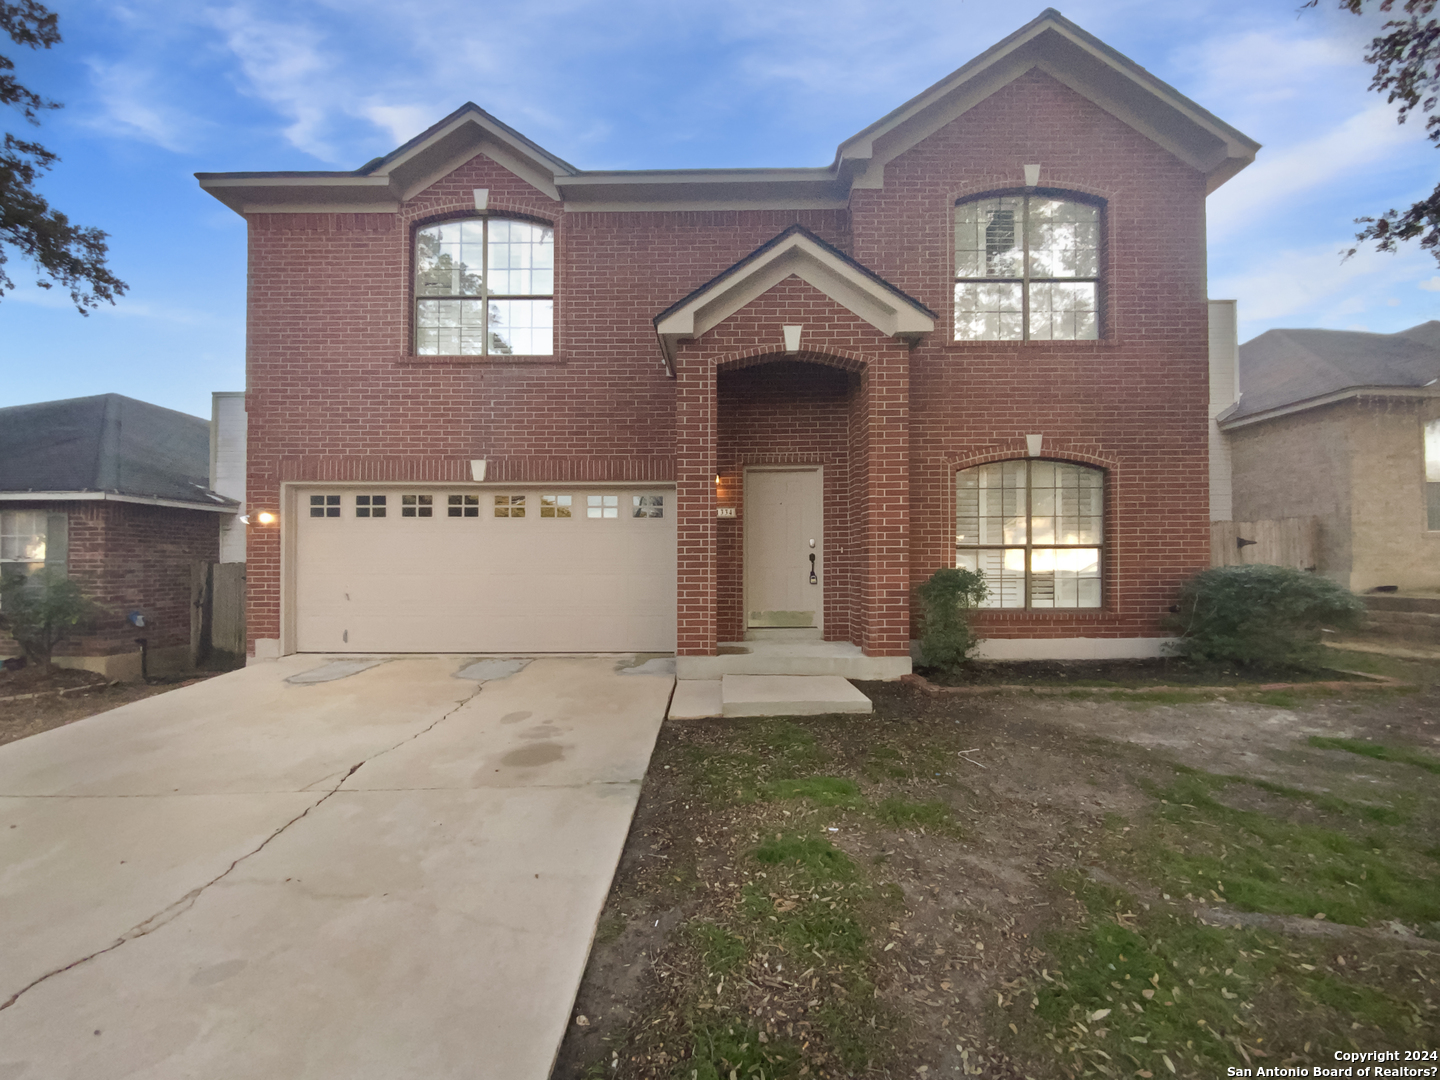 Photo of 1334 Canyon Parke Dr in San Antonio, TX